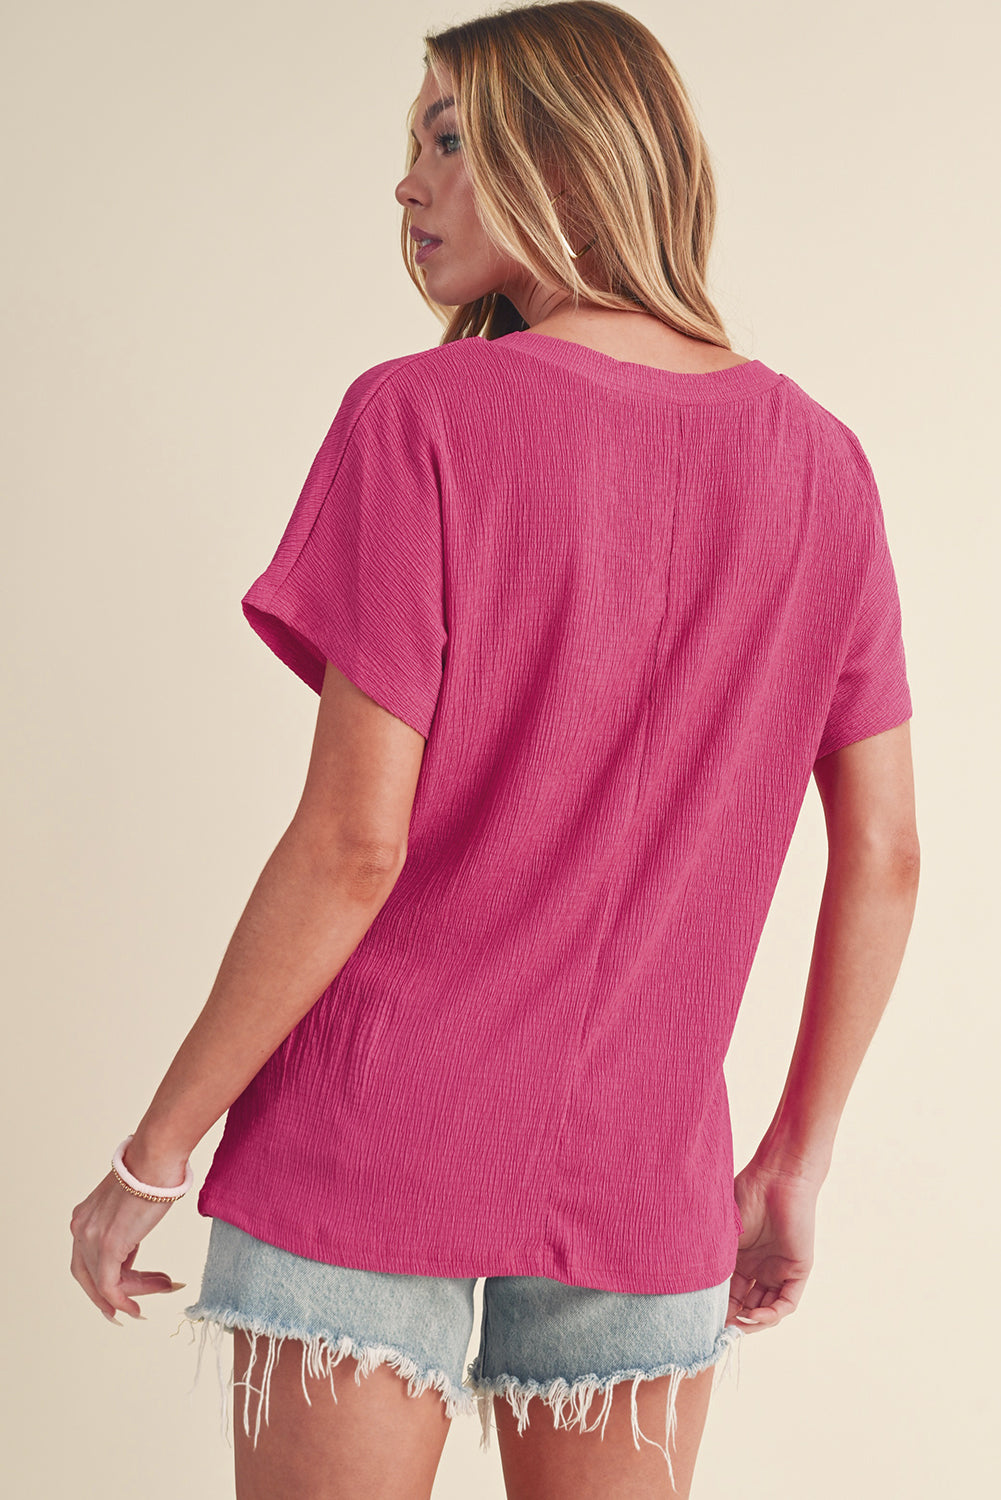 Discover elegance with our V Neck Blouse—perfect for any occasion. Flatter your figure and enjoy all-day comfort. Shop now!